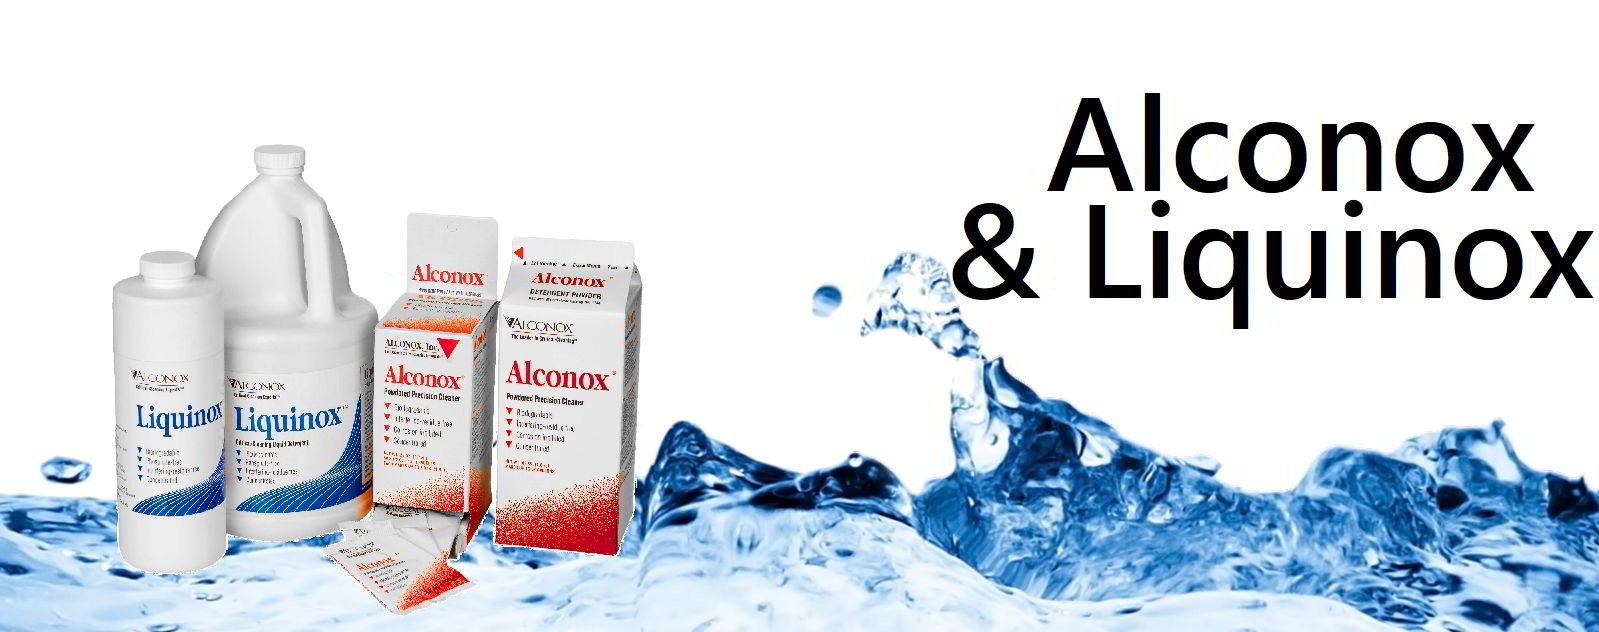 Alconox® Cleaning Supplies